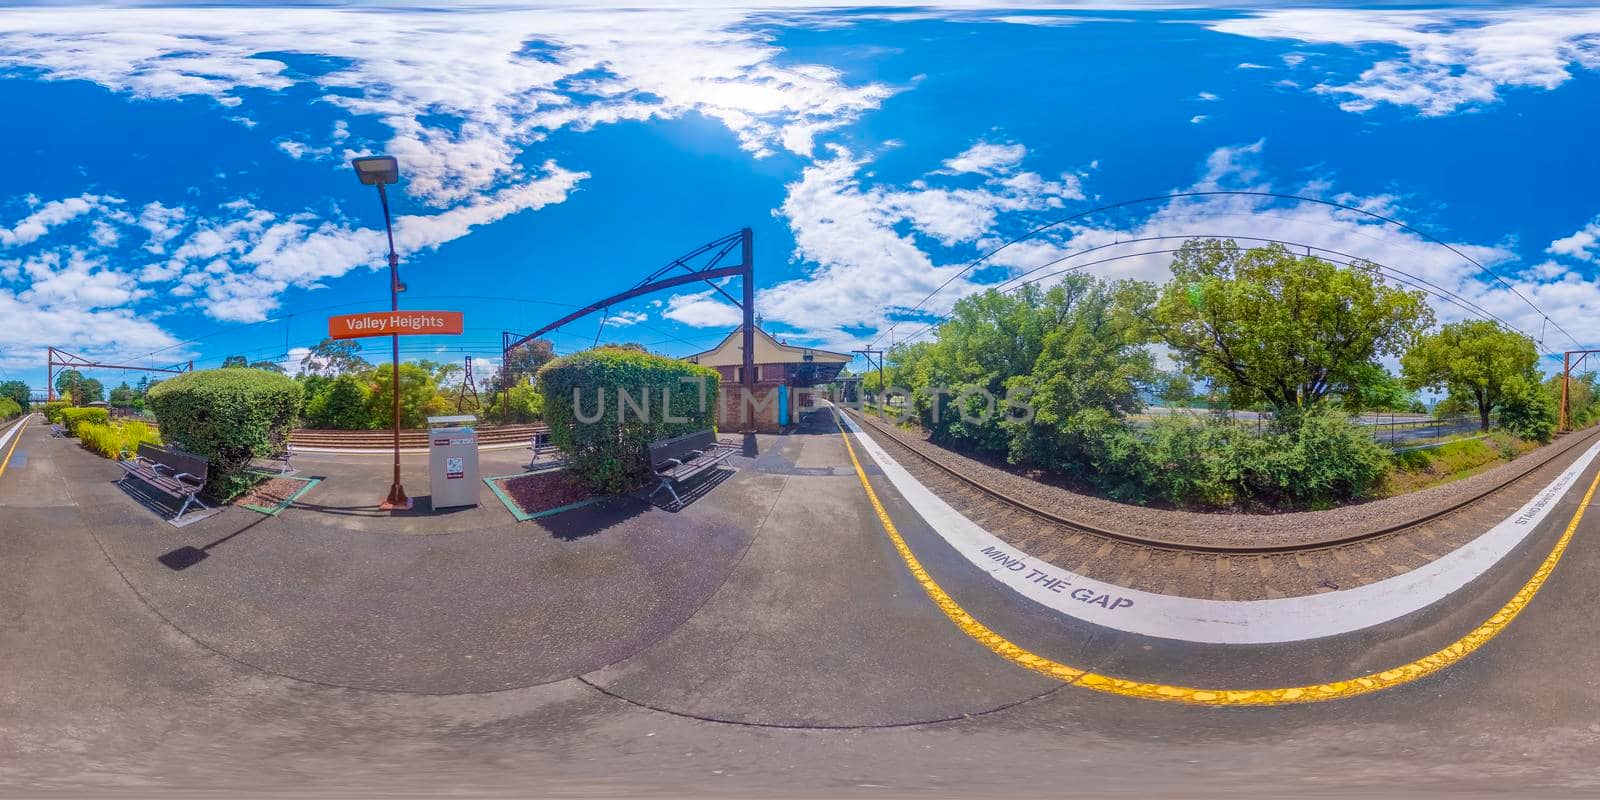 Spherical 360 panorama photograph of the Valley Heights Train Station by WittkePhotos